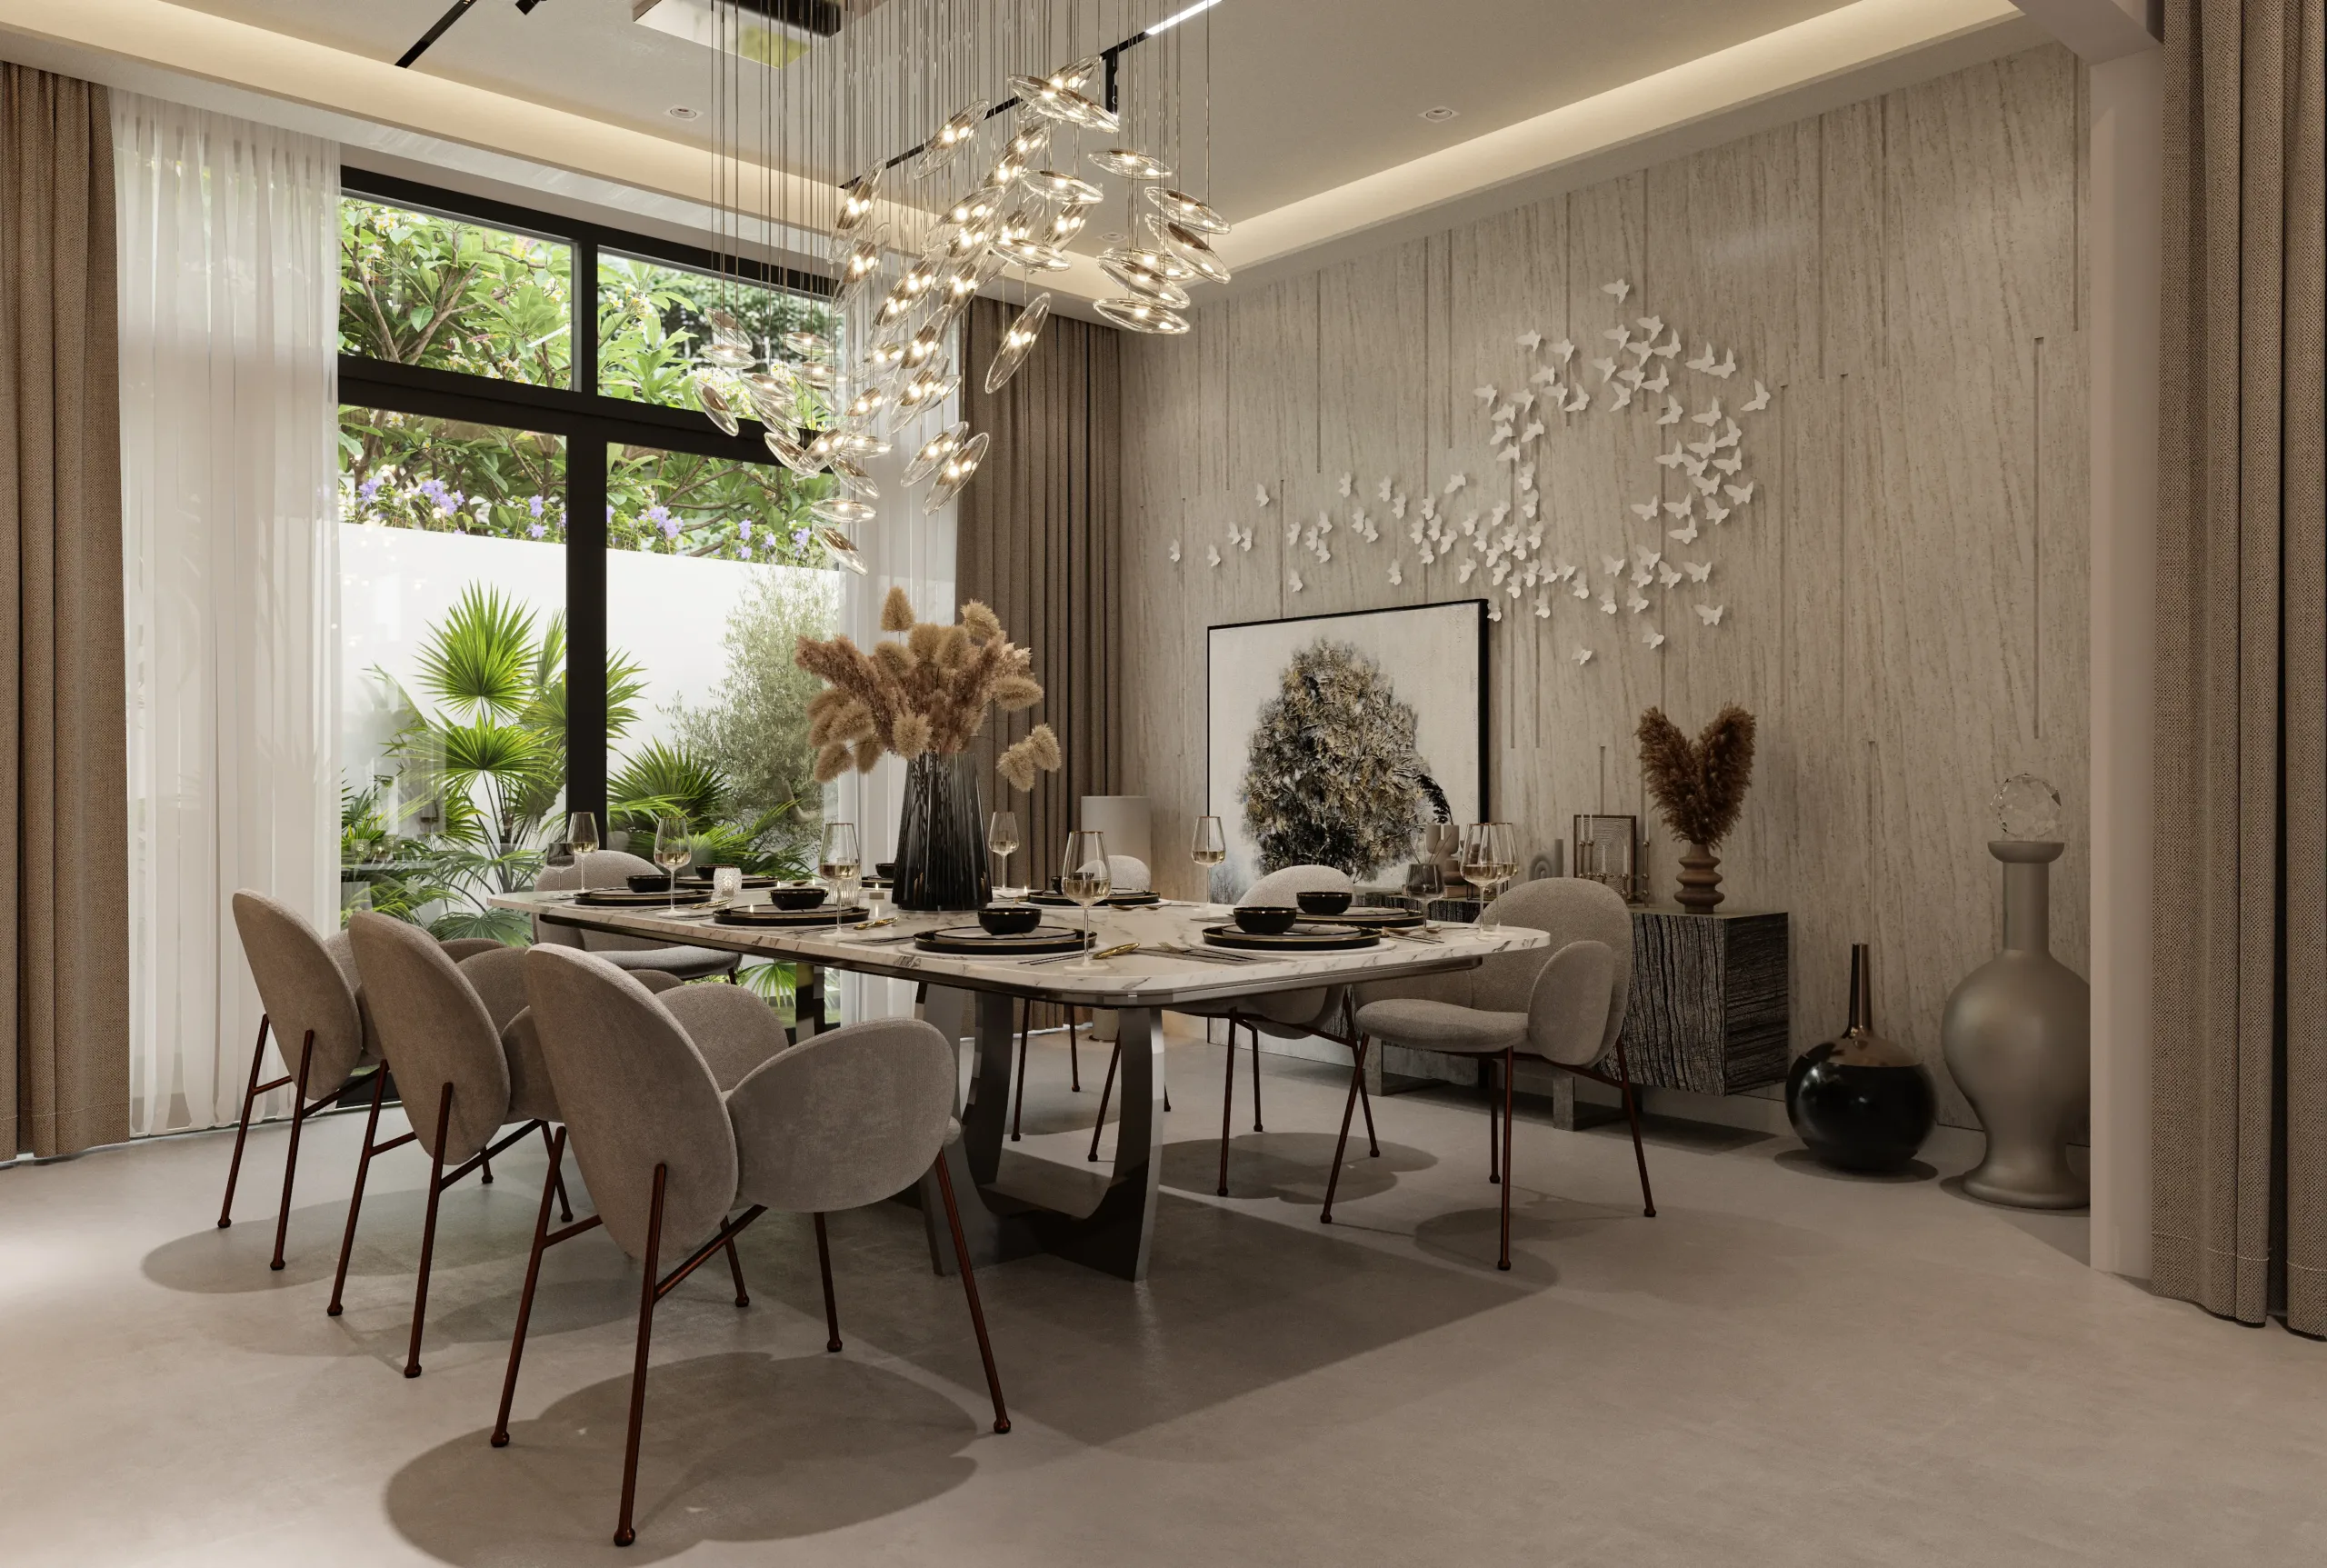 Dining area design and build